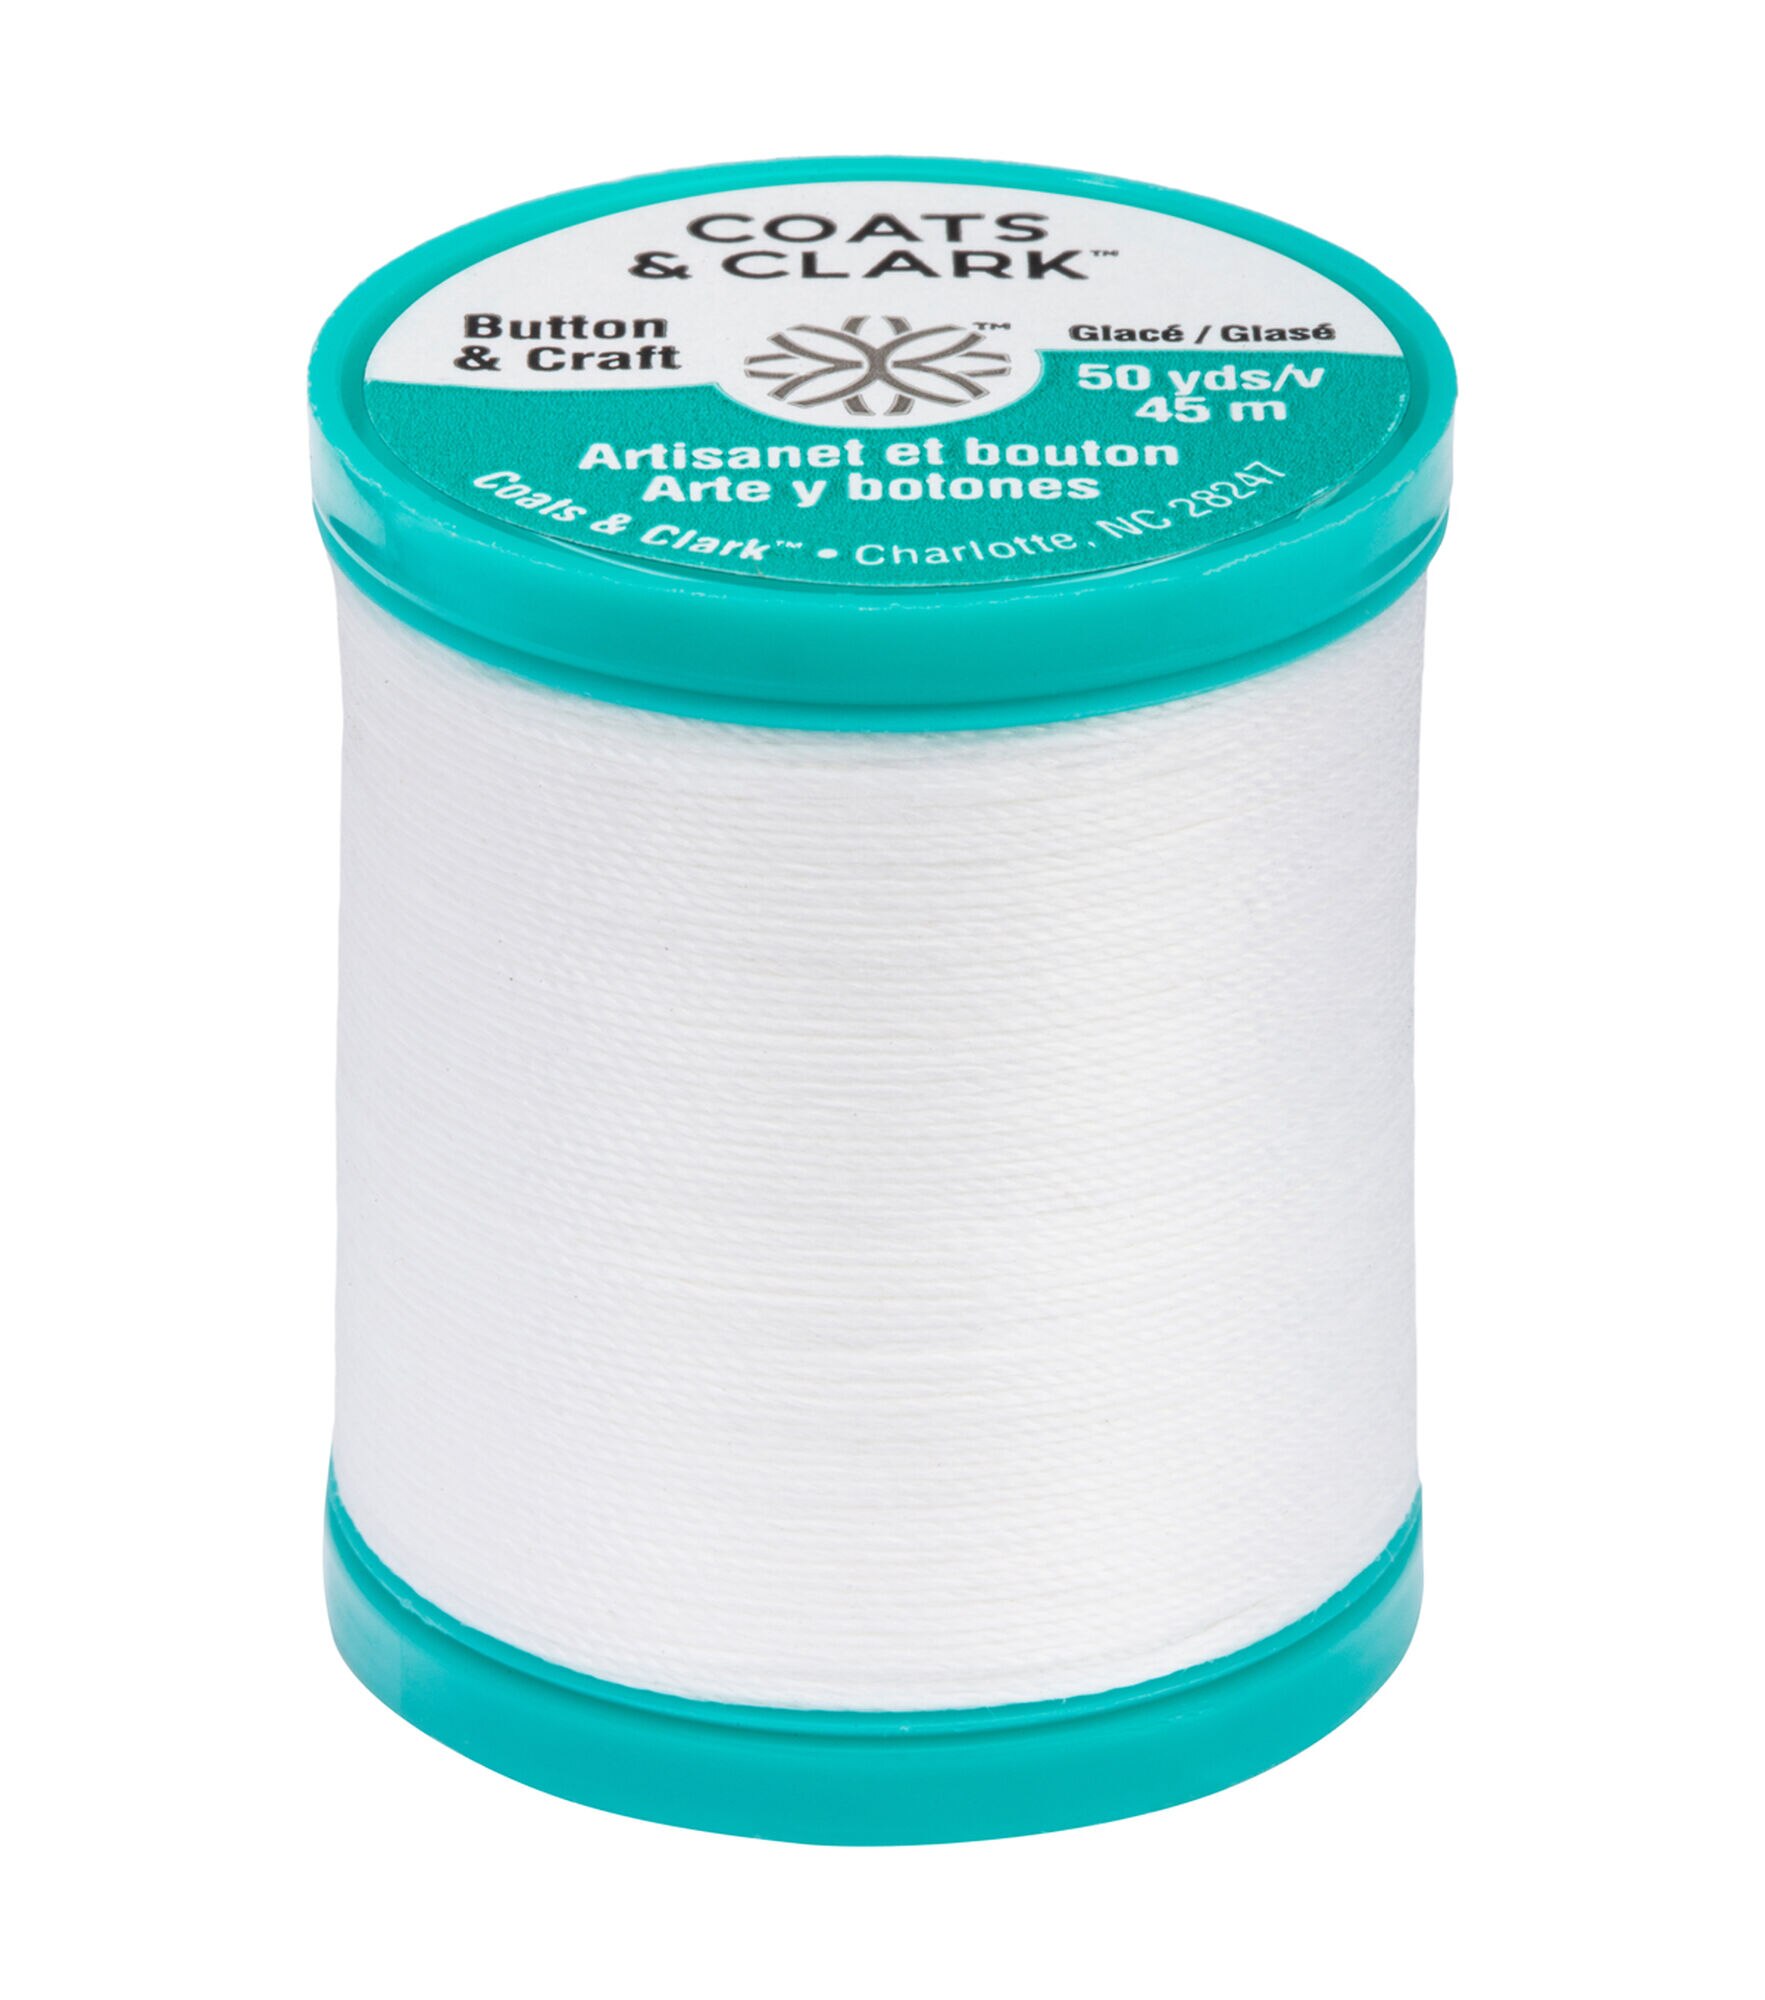 Coats Dual Duty Plus Hand Quilting Thread 325yd-Field Green, 1 count -  Ralphs